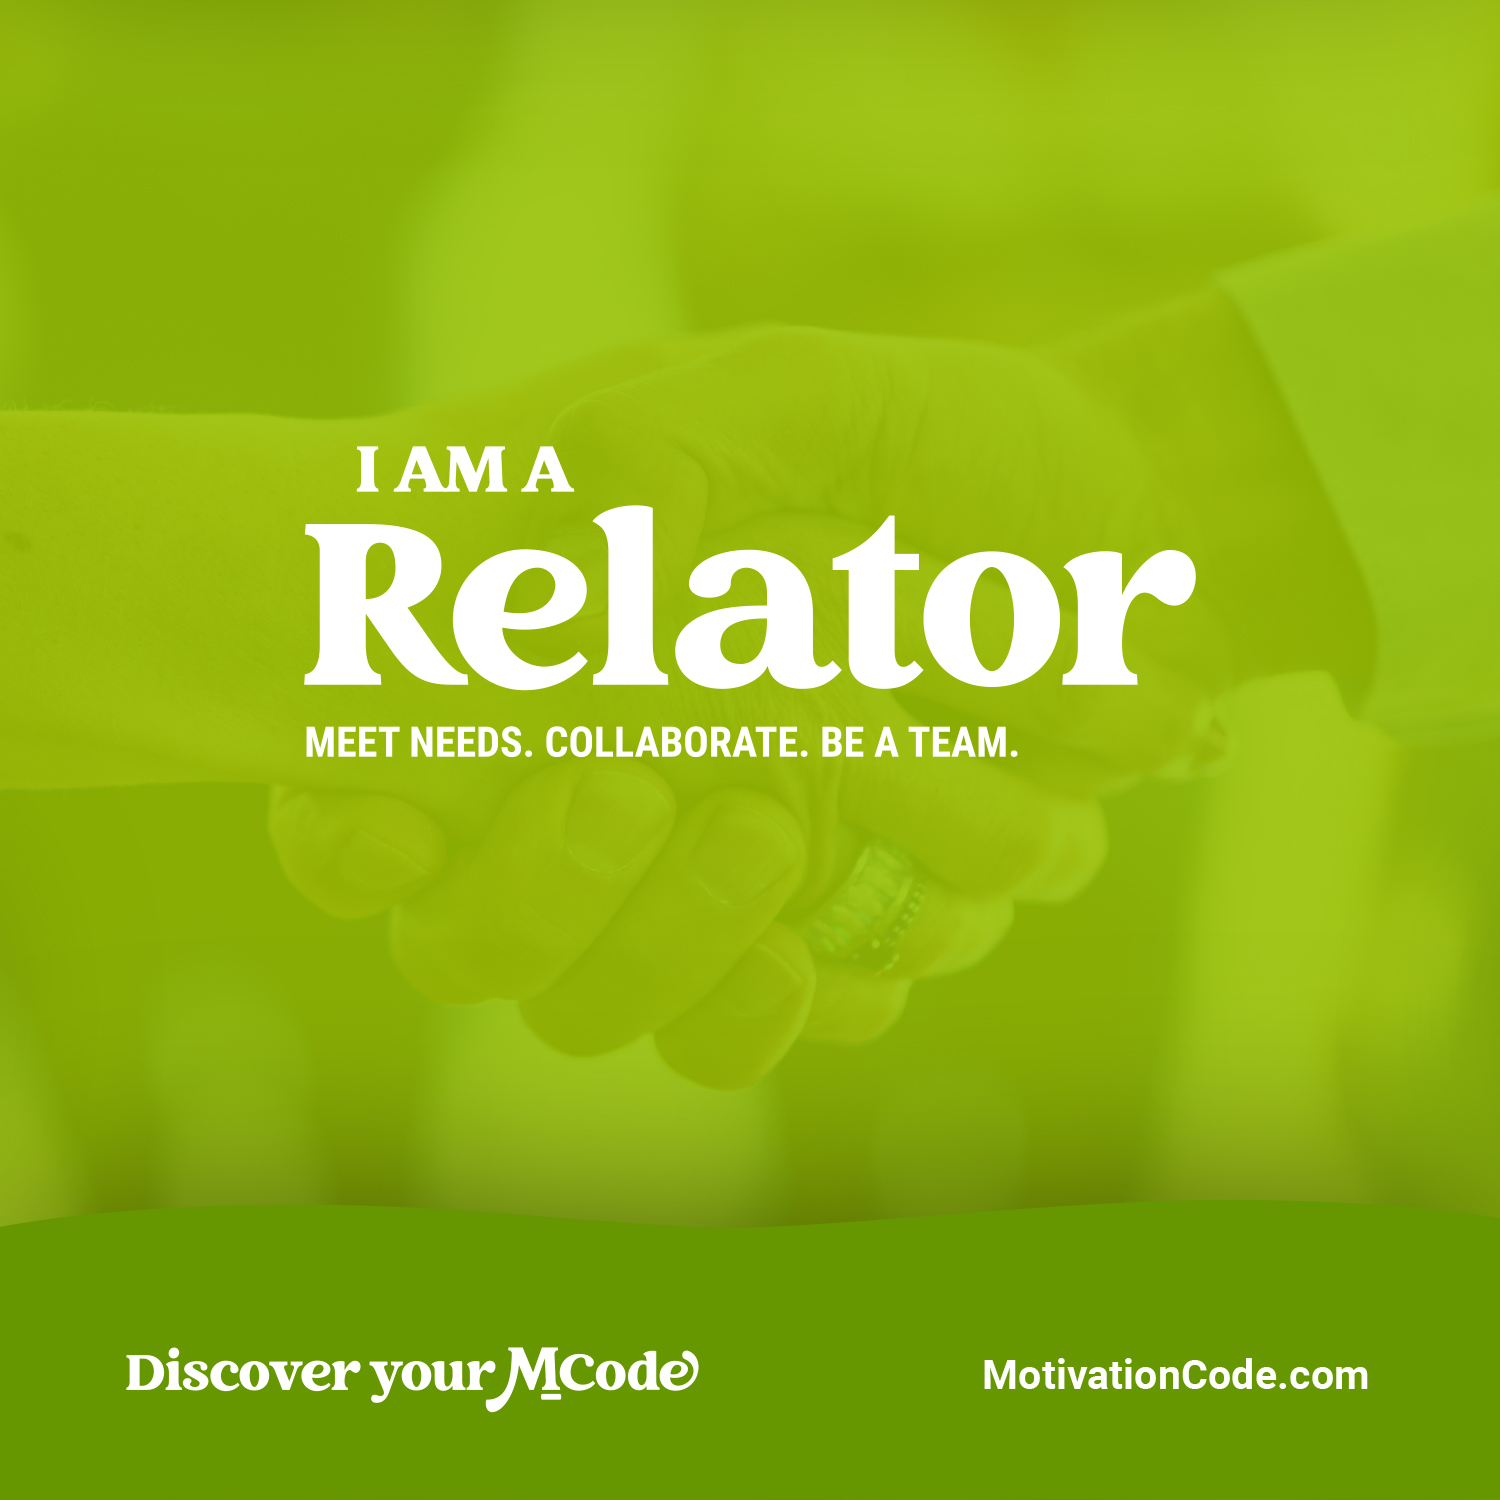 MCode Relator image you can download and share on social media